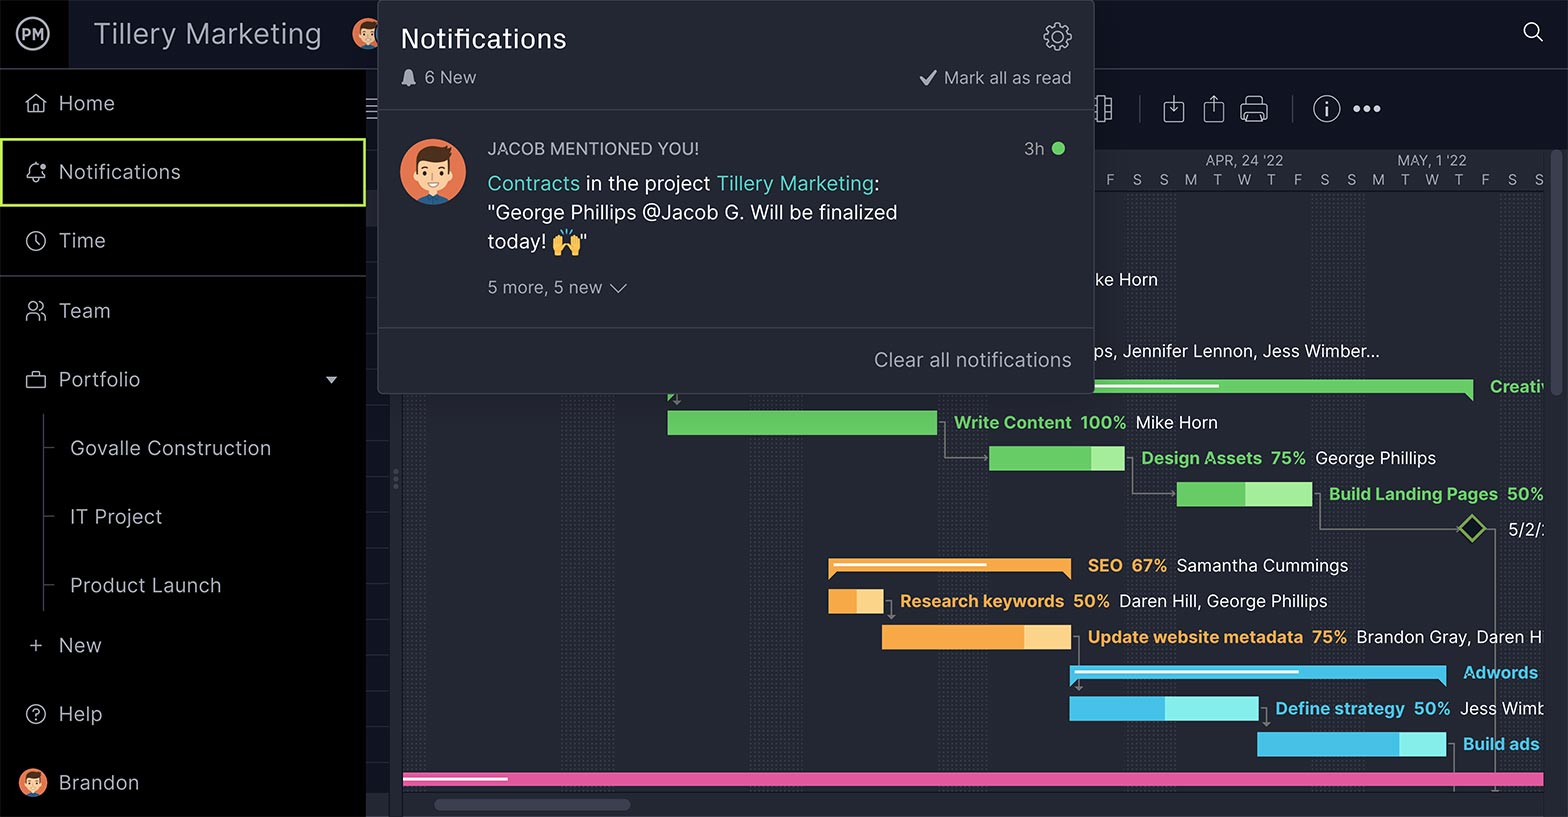 ProjectManager's team collaboration features help teams keep track of action items